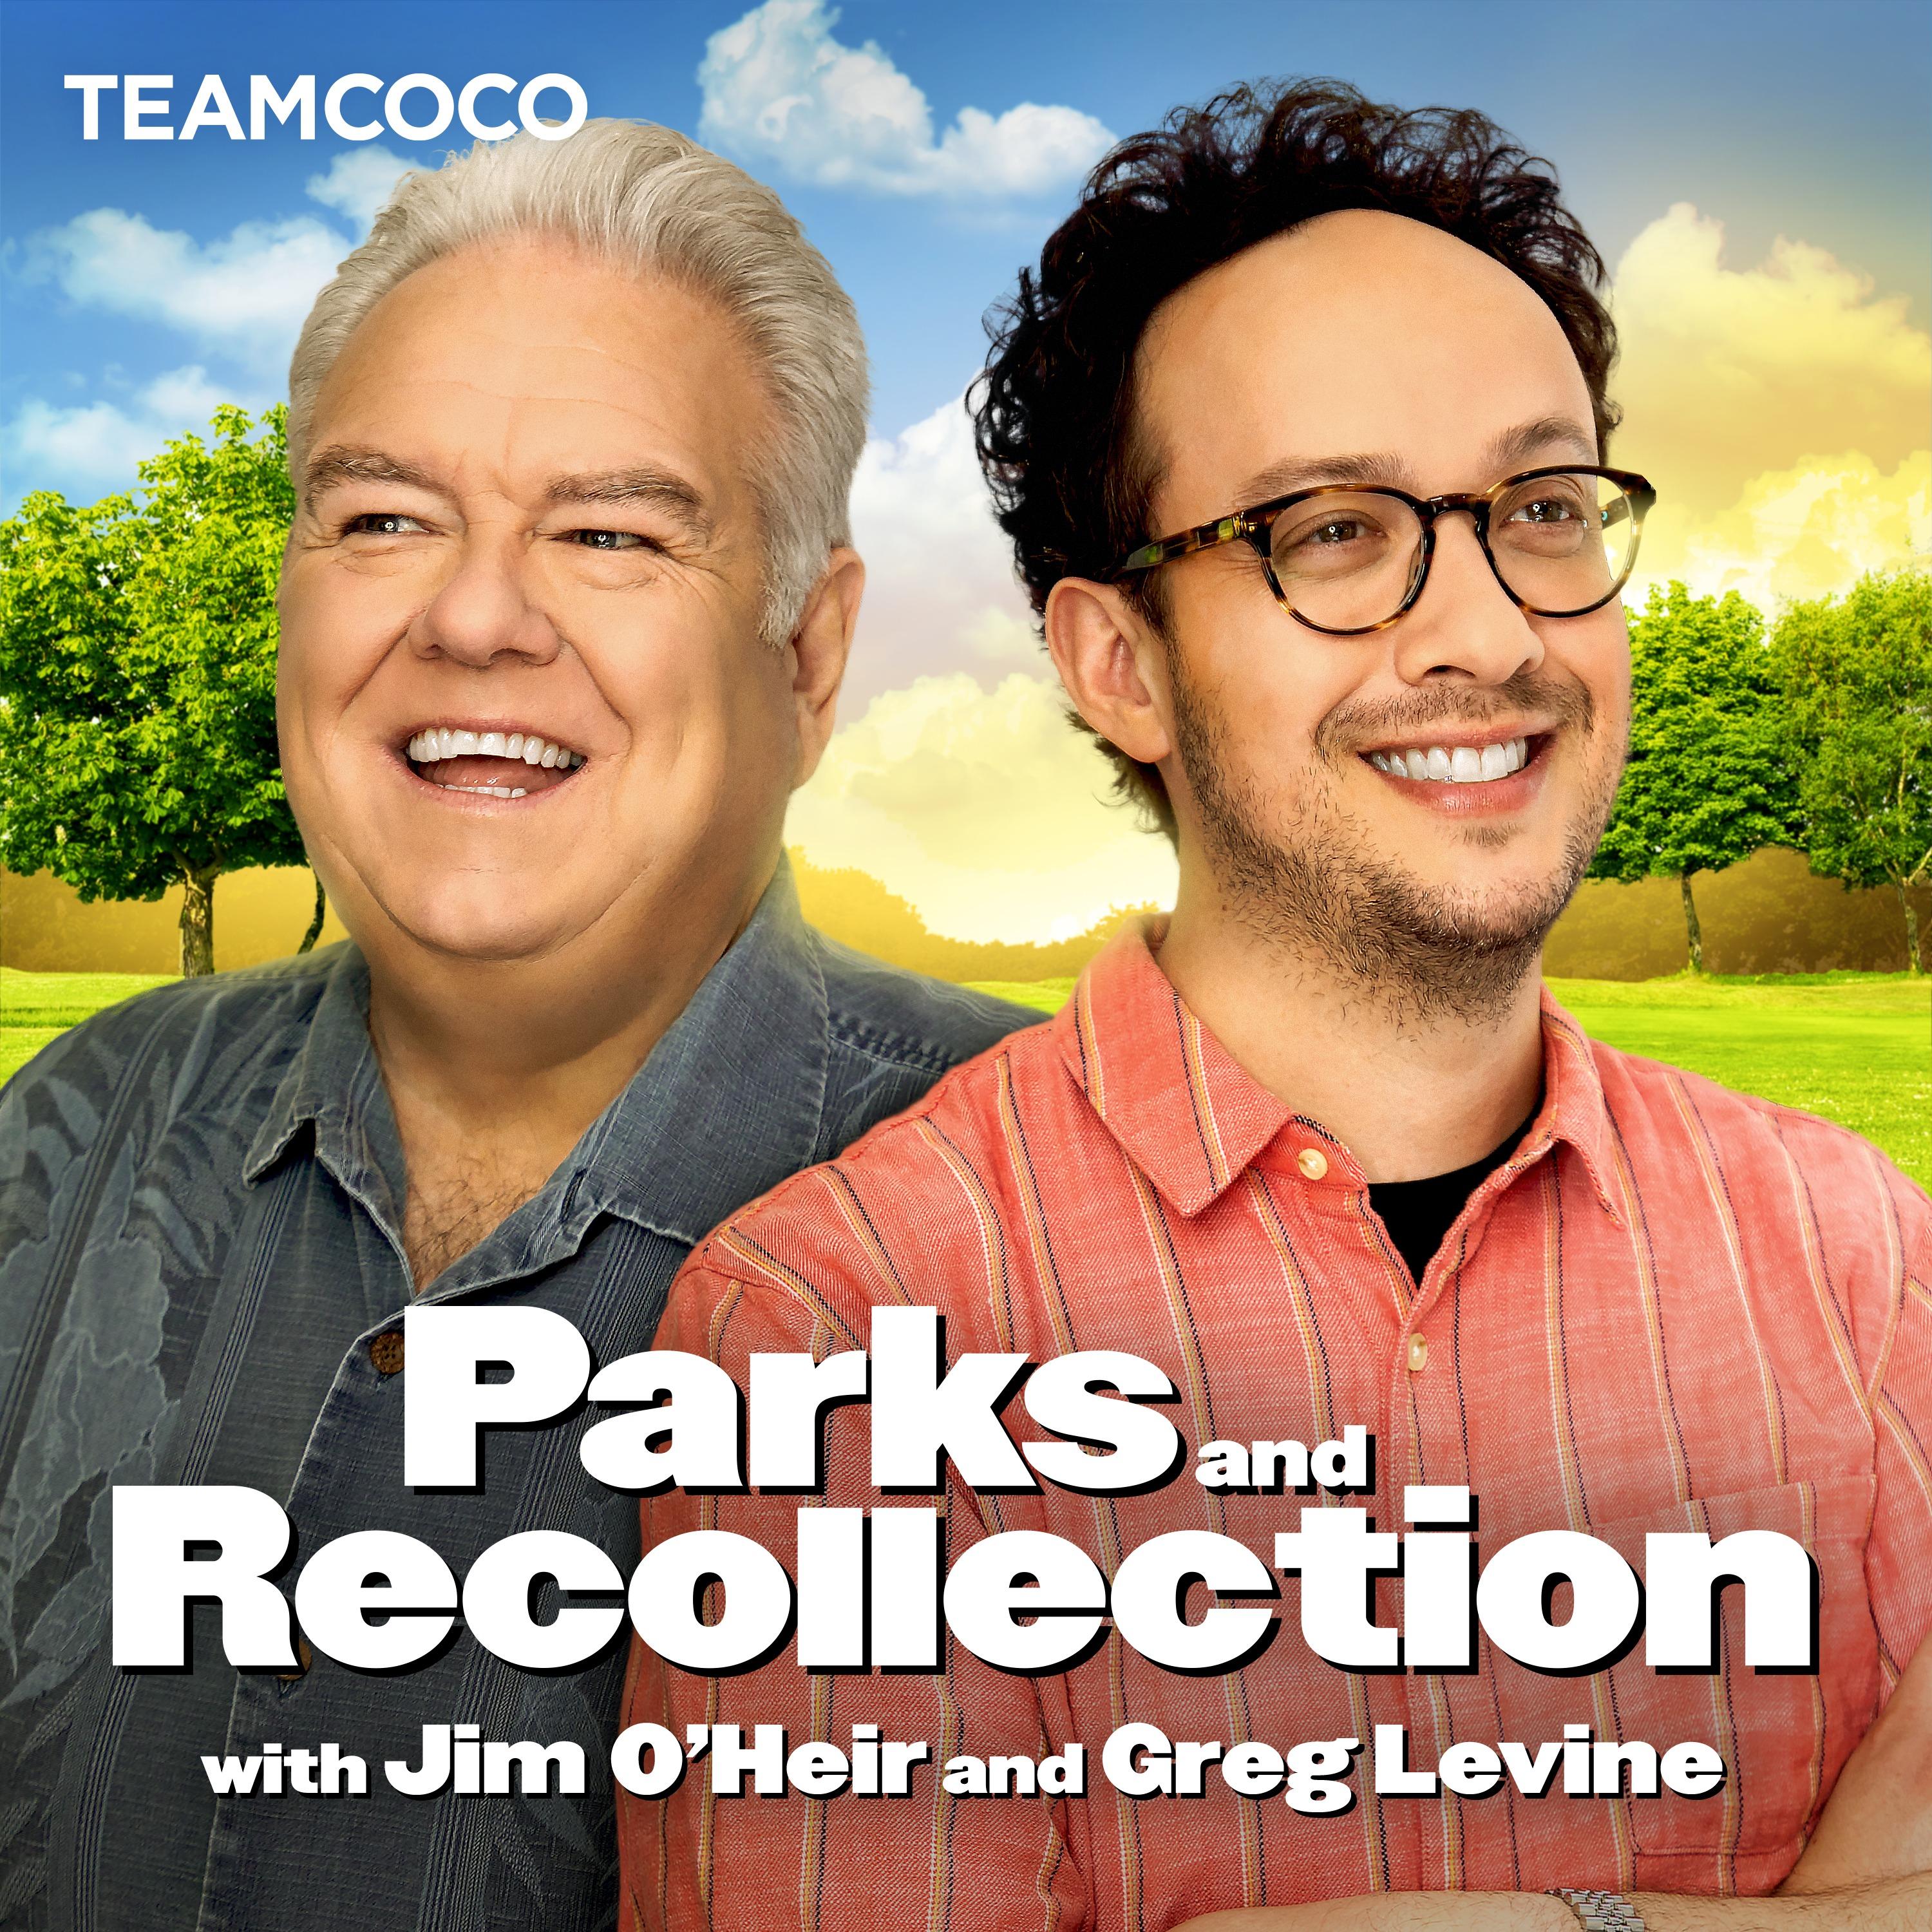 Show poster of Parks and Recollection